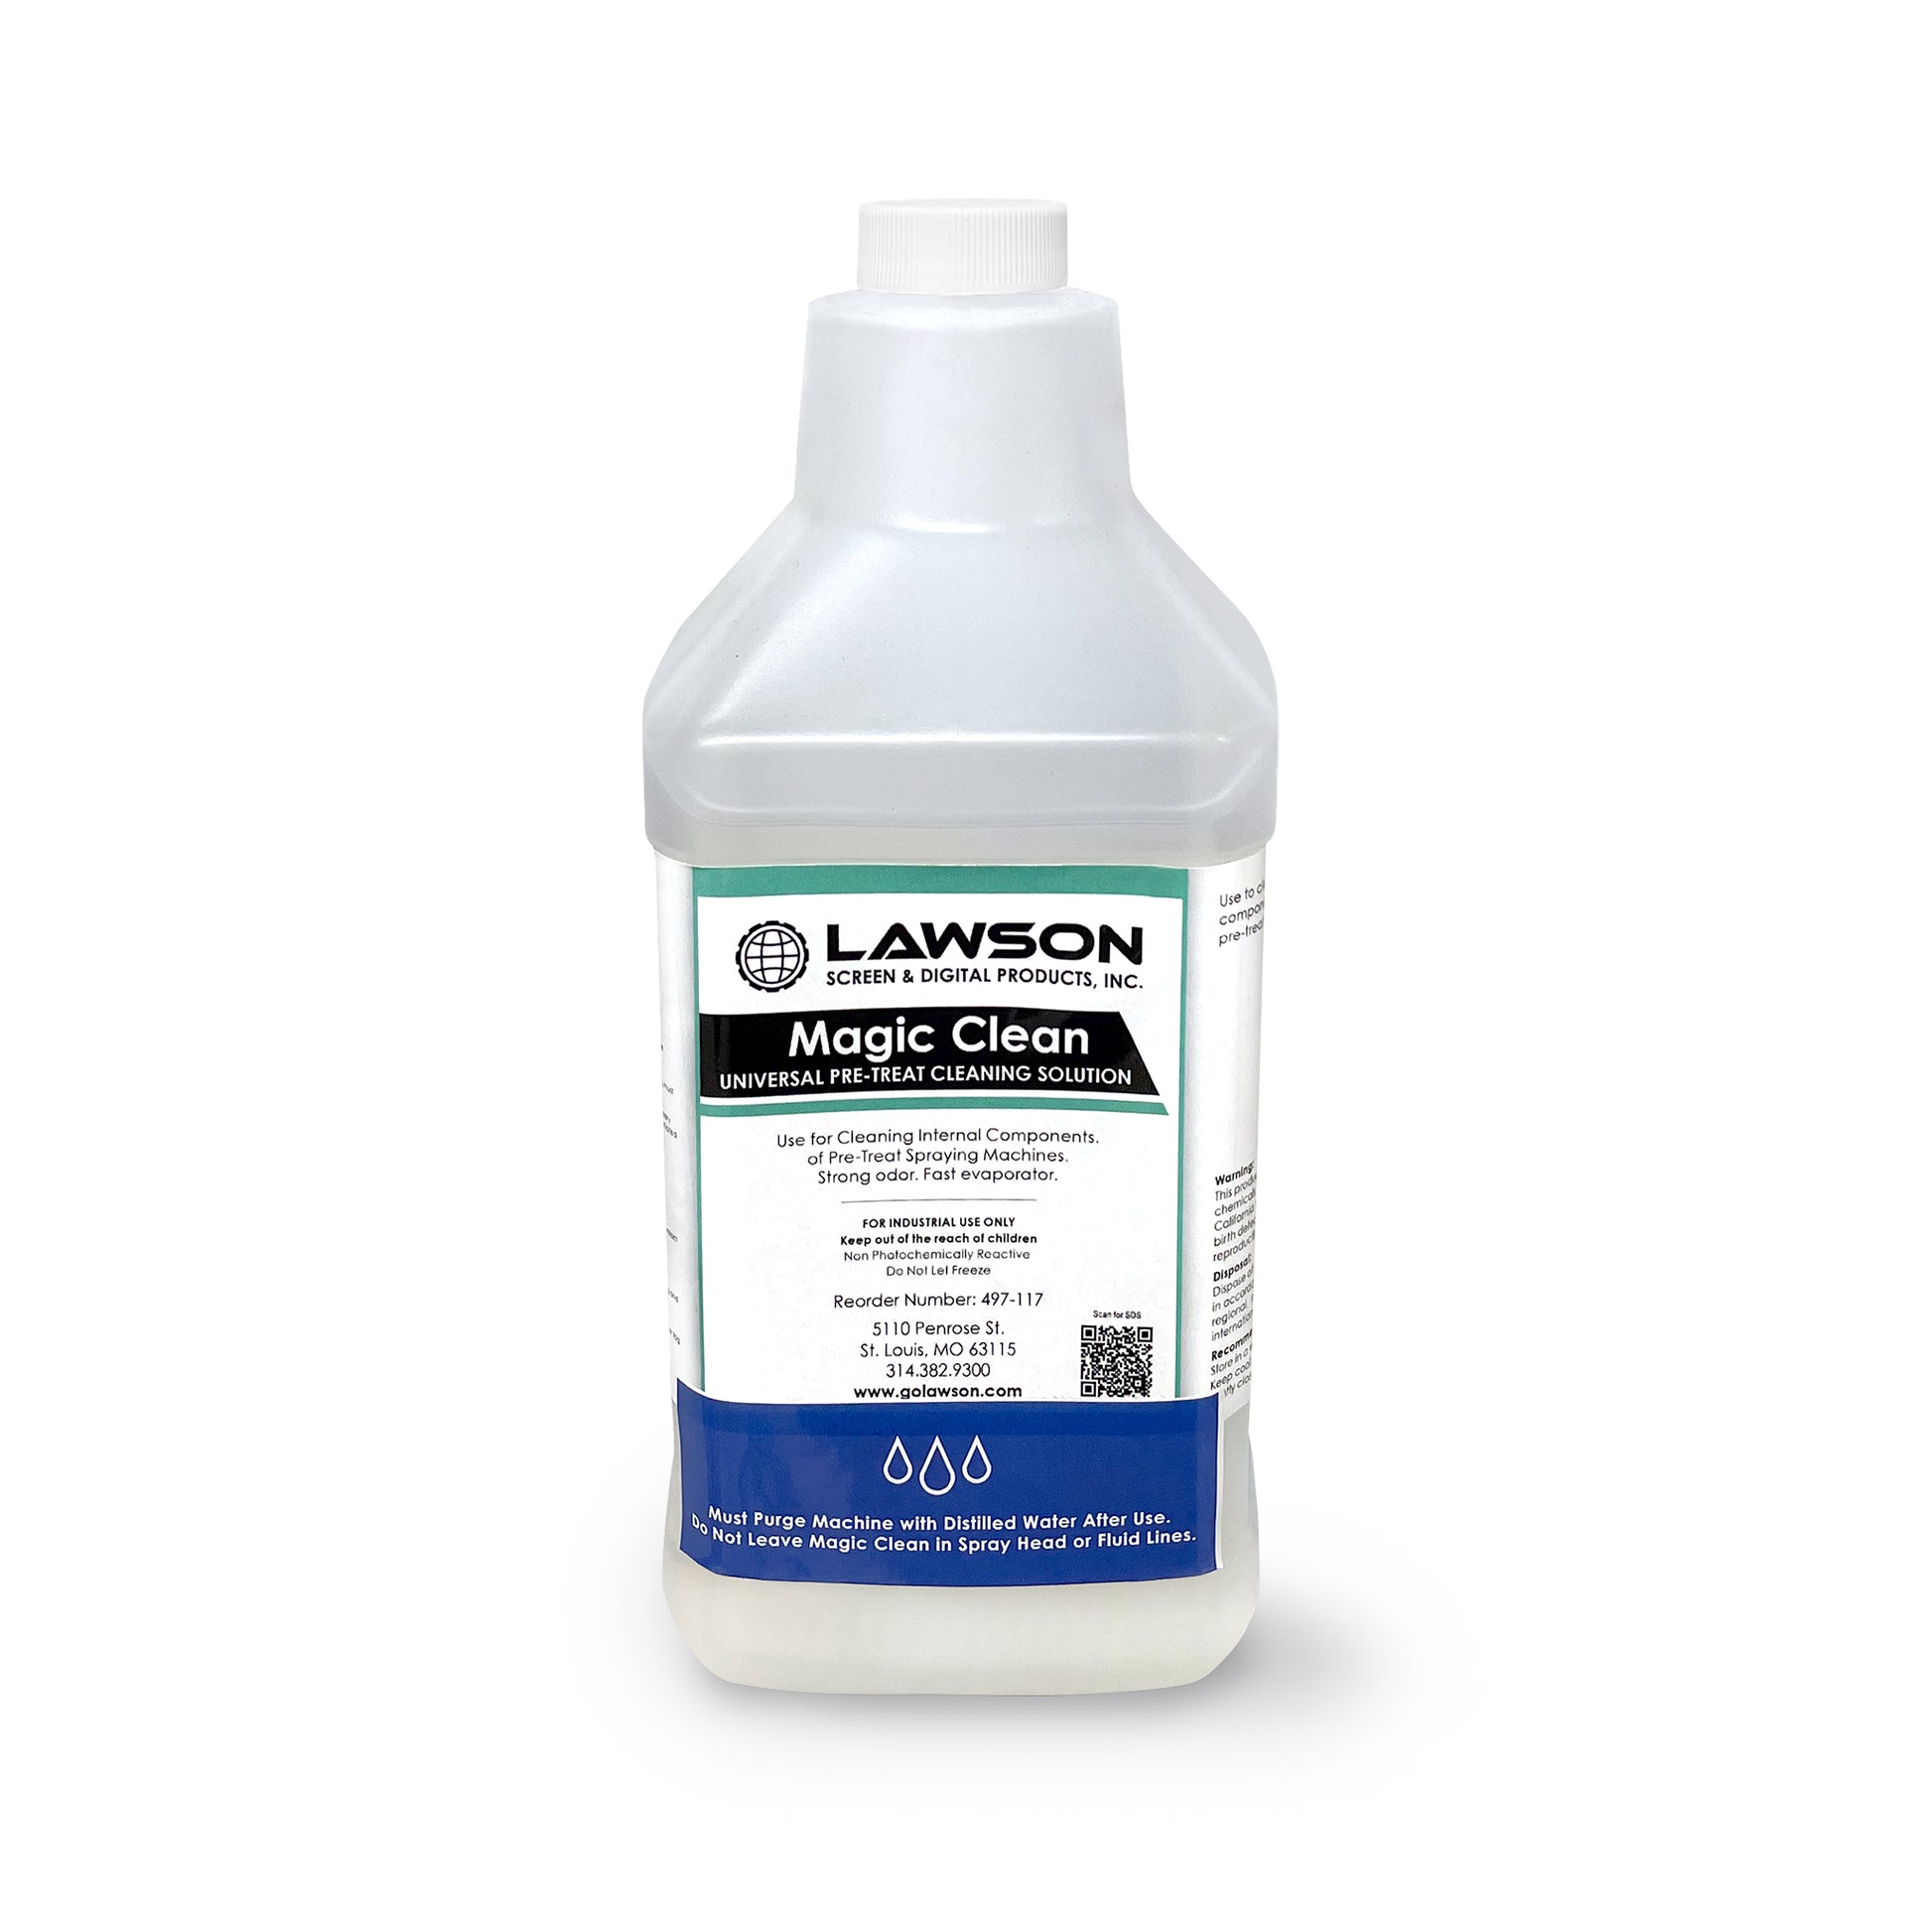 Magic Clean #485 - Universal Pre-Treat Cleaner Solution-Pre-Treatment Solution-Lawson Screen & Digital Products Lawson Screen & Digital Products dtf printer screen printing direct to fabric equipment machine printers equipment dtg printer screen printing direct to garment equipment machine printers